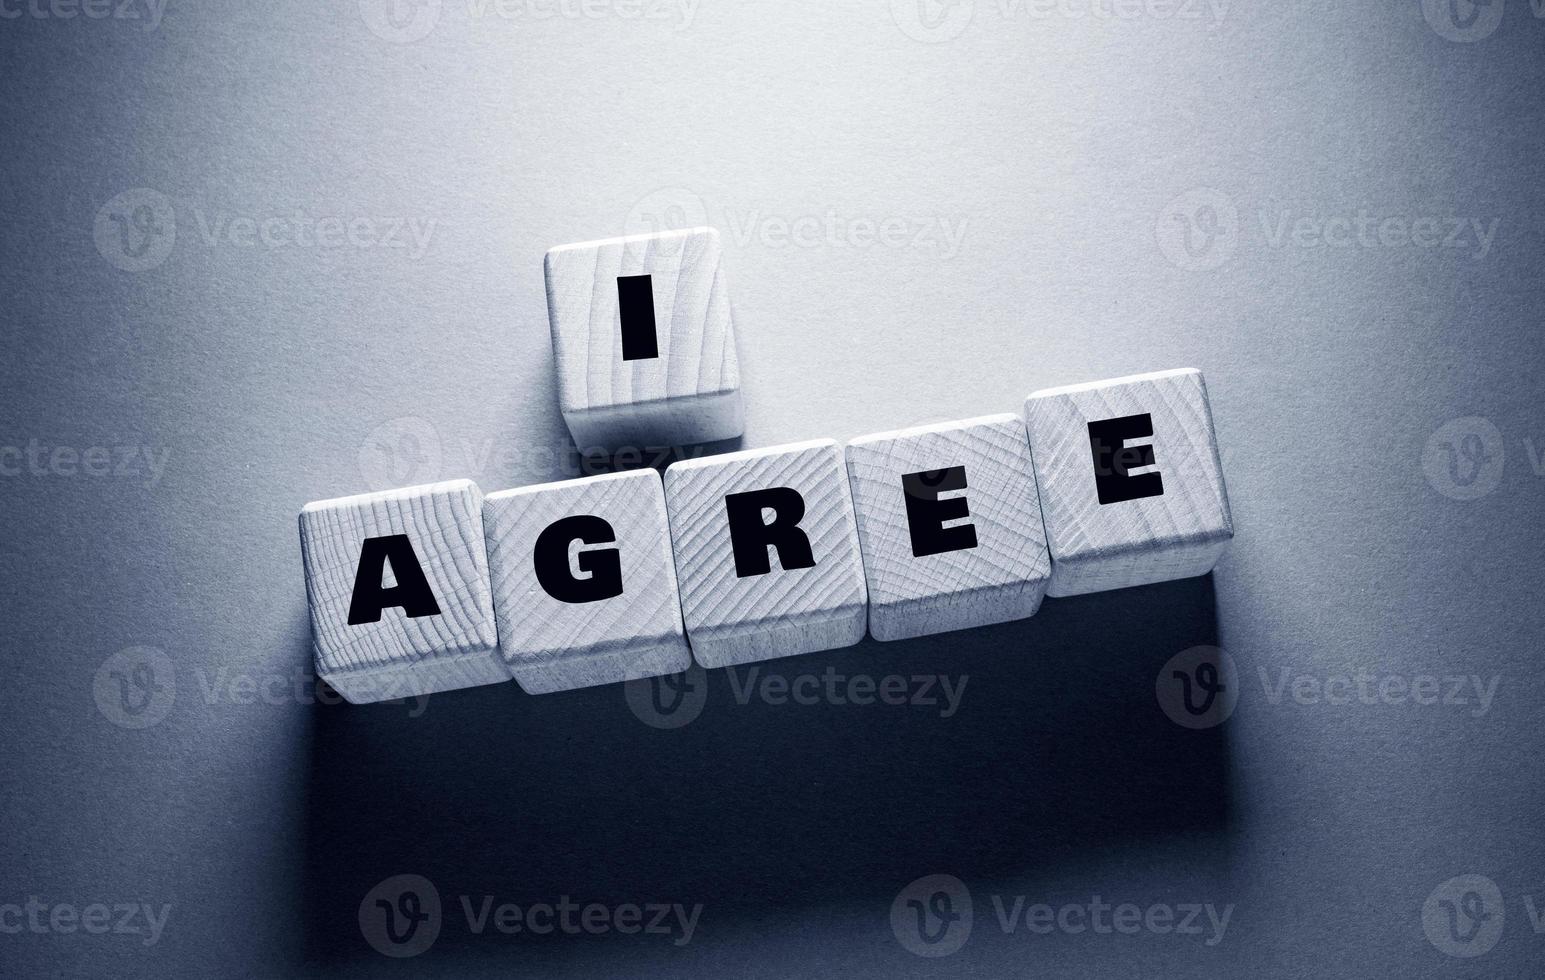 I Agree Word with Wooden Cubes photo